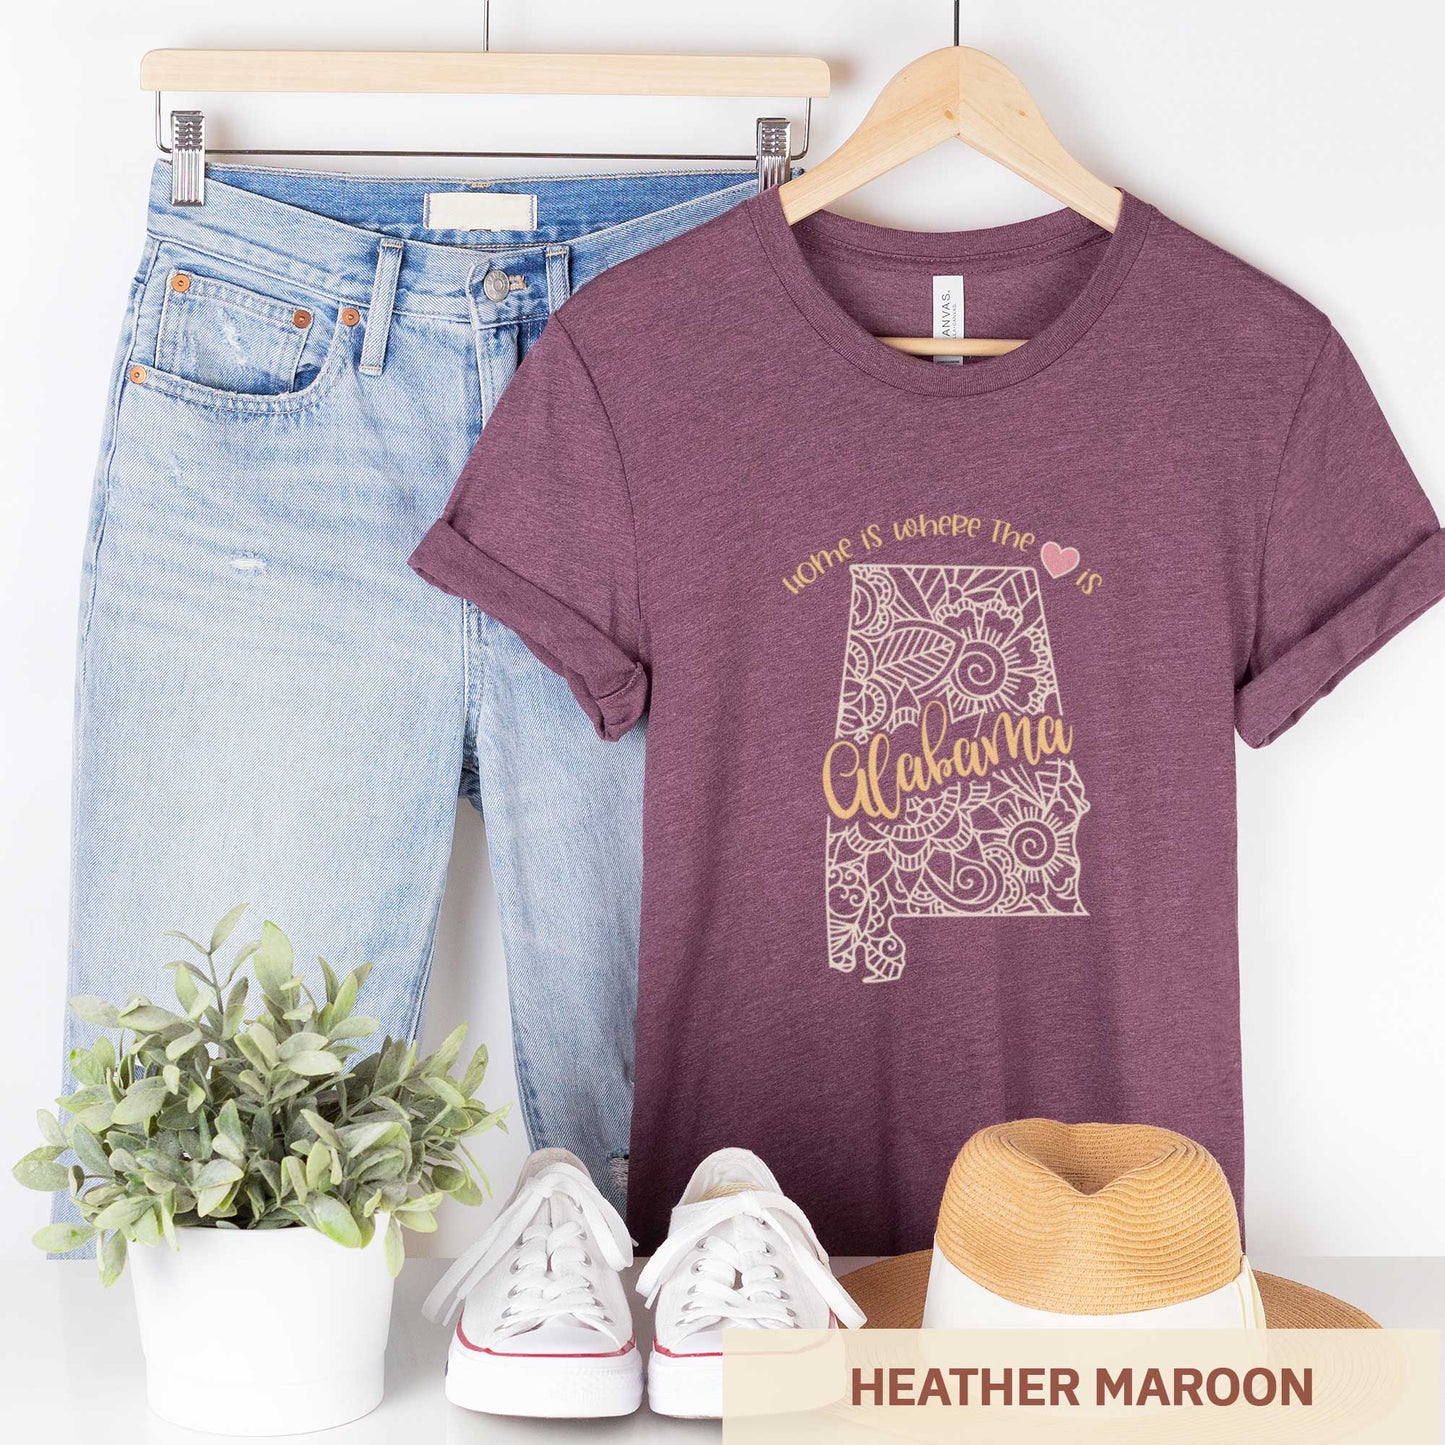 A hanging heather maroon Bella Canvas t-shirt featuring a mandala in the shape of Alabama with the words home is where the heart is.